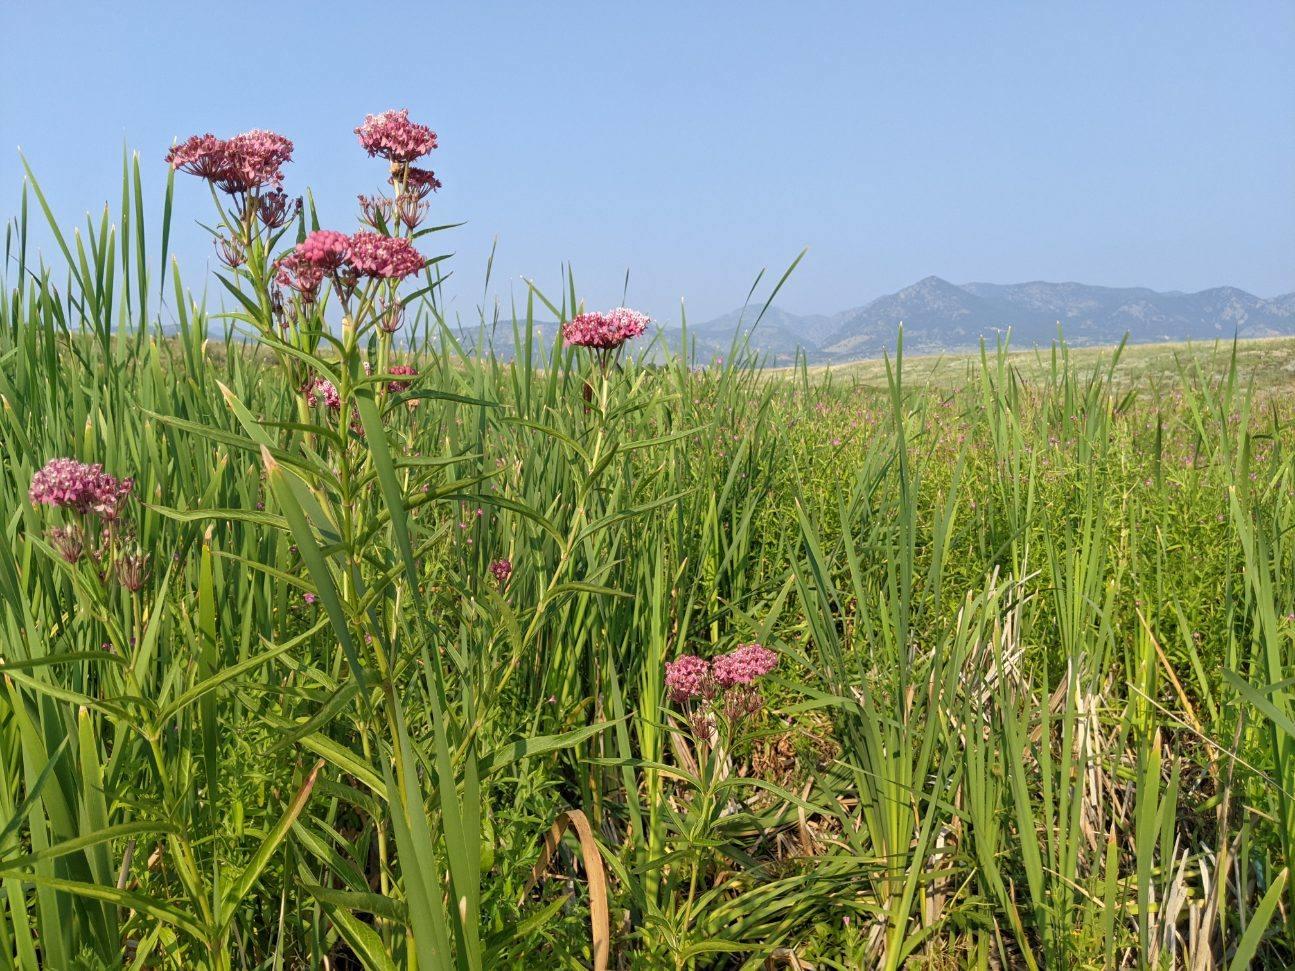 An image showing grass and flowers as the result of the restoration project.